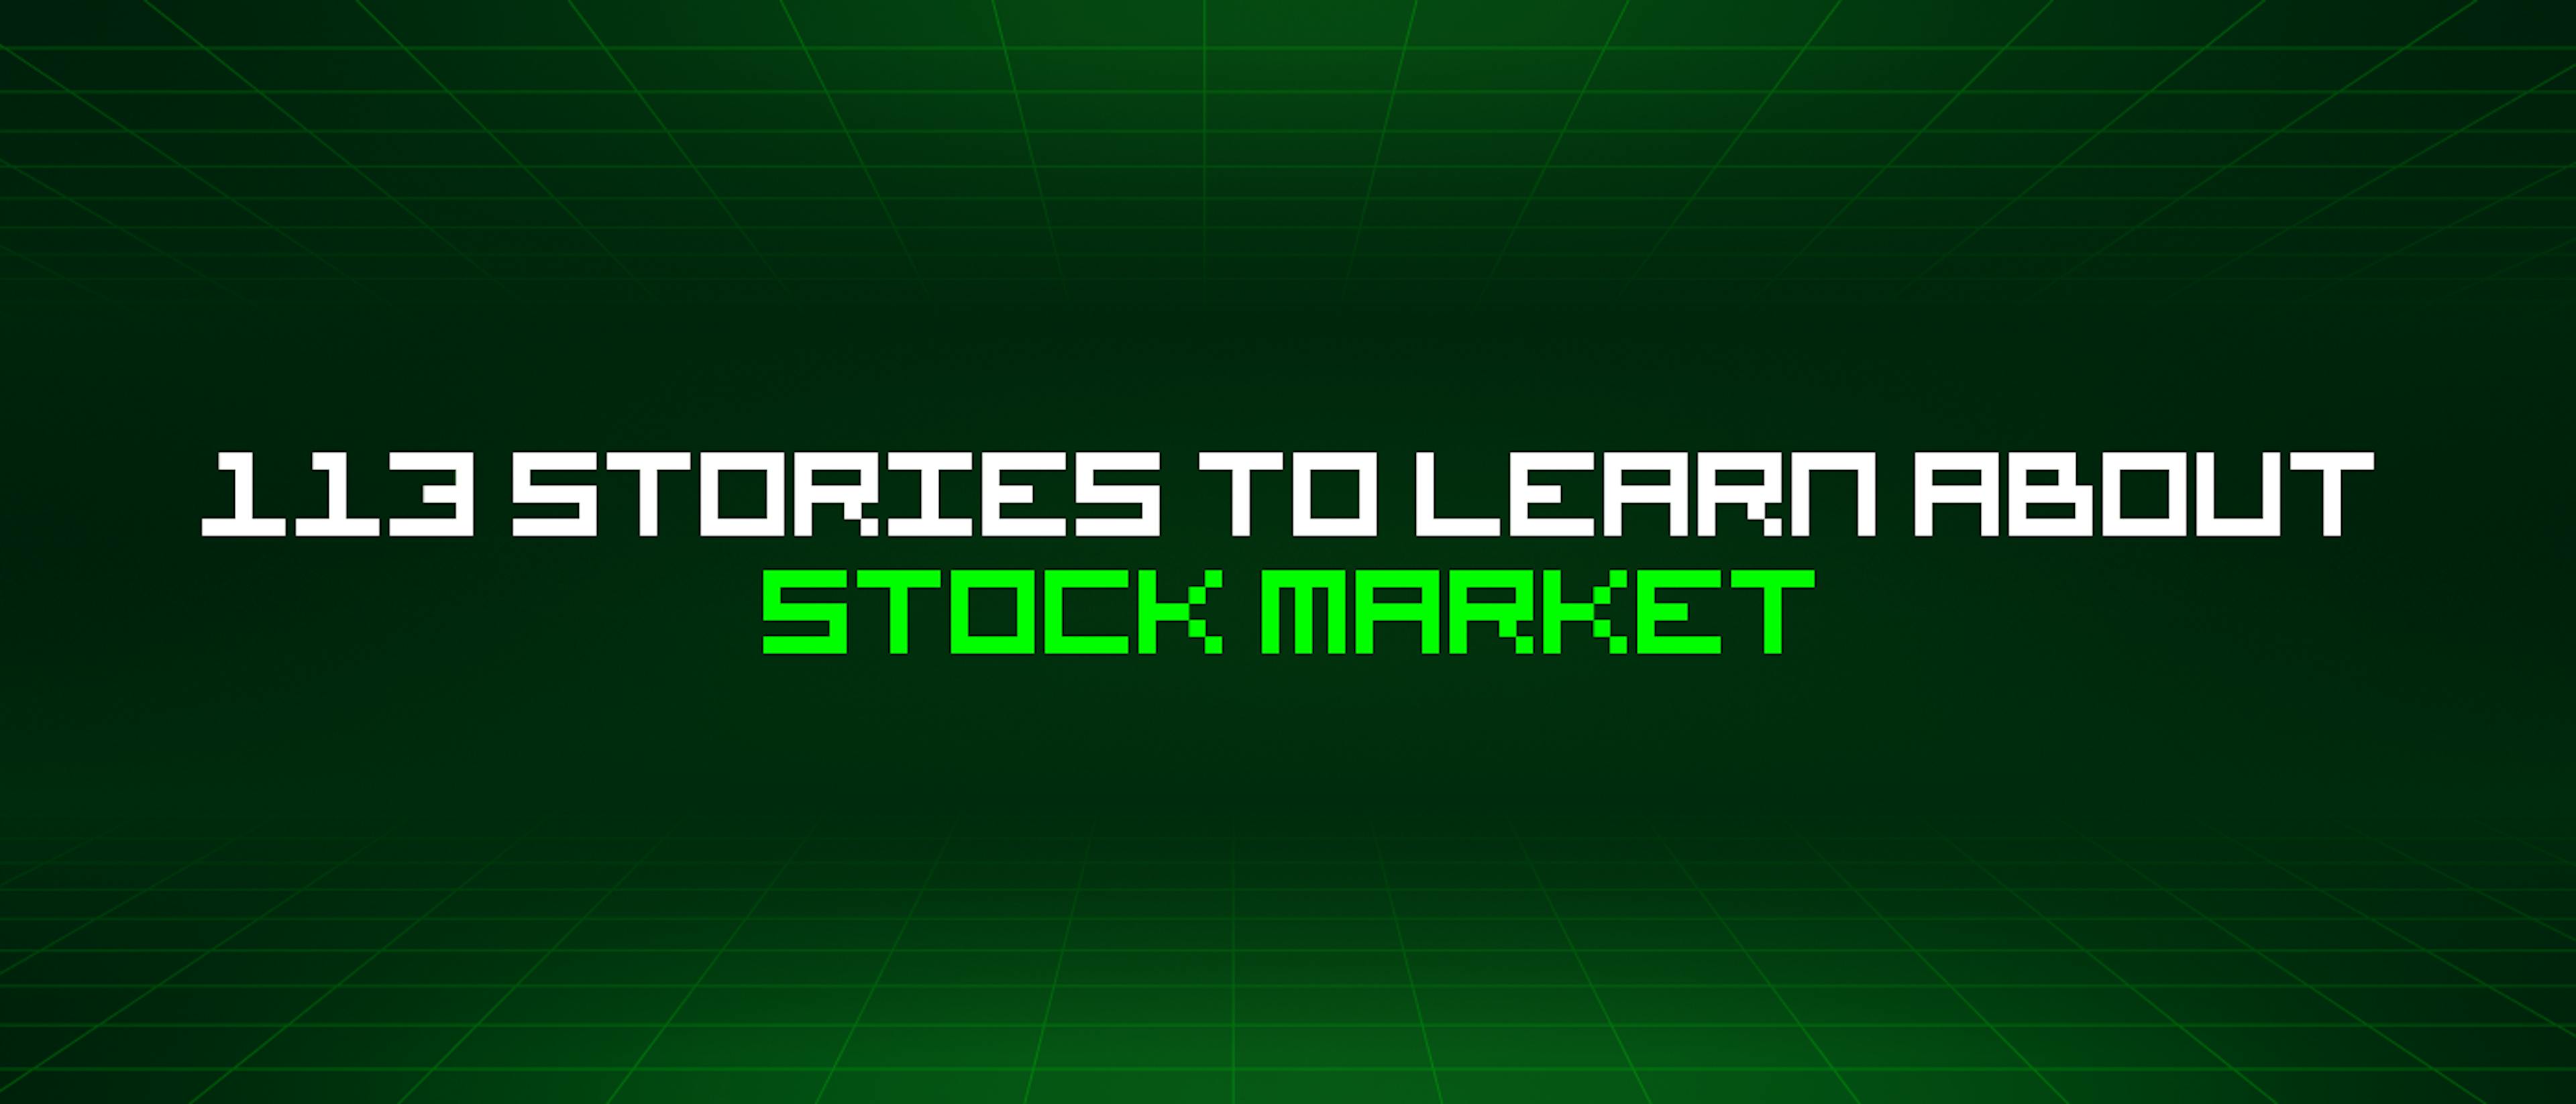 featured image - 113 Stories To Learn About Stock Market